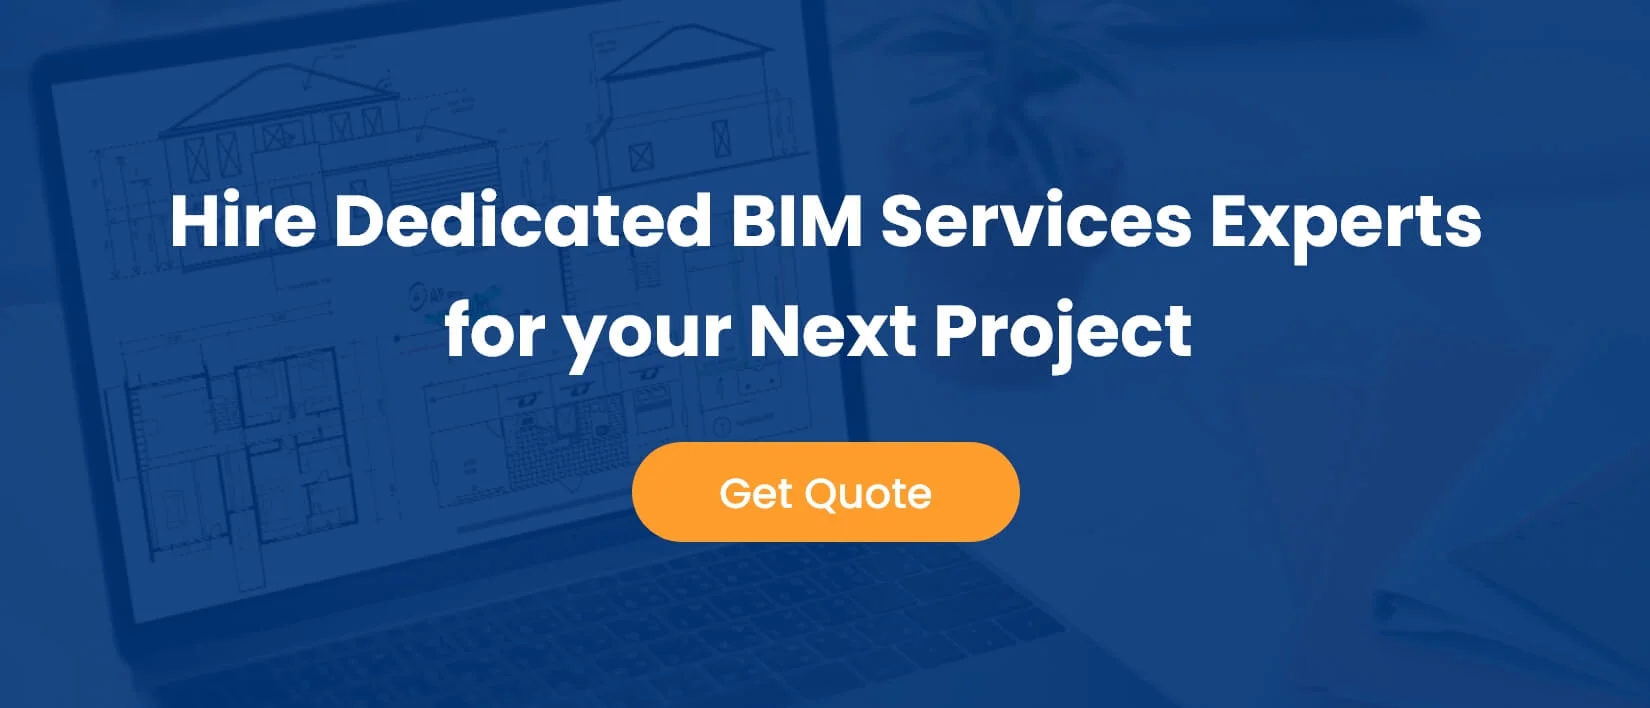 Hire Dedicated BIM Services Experts for your Next Project